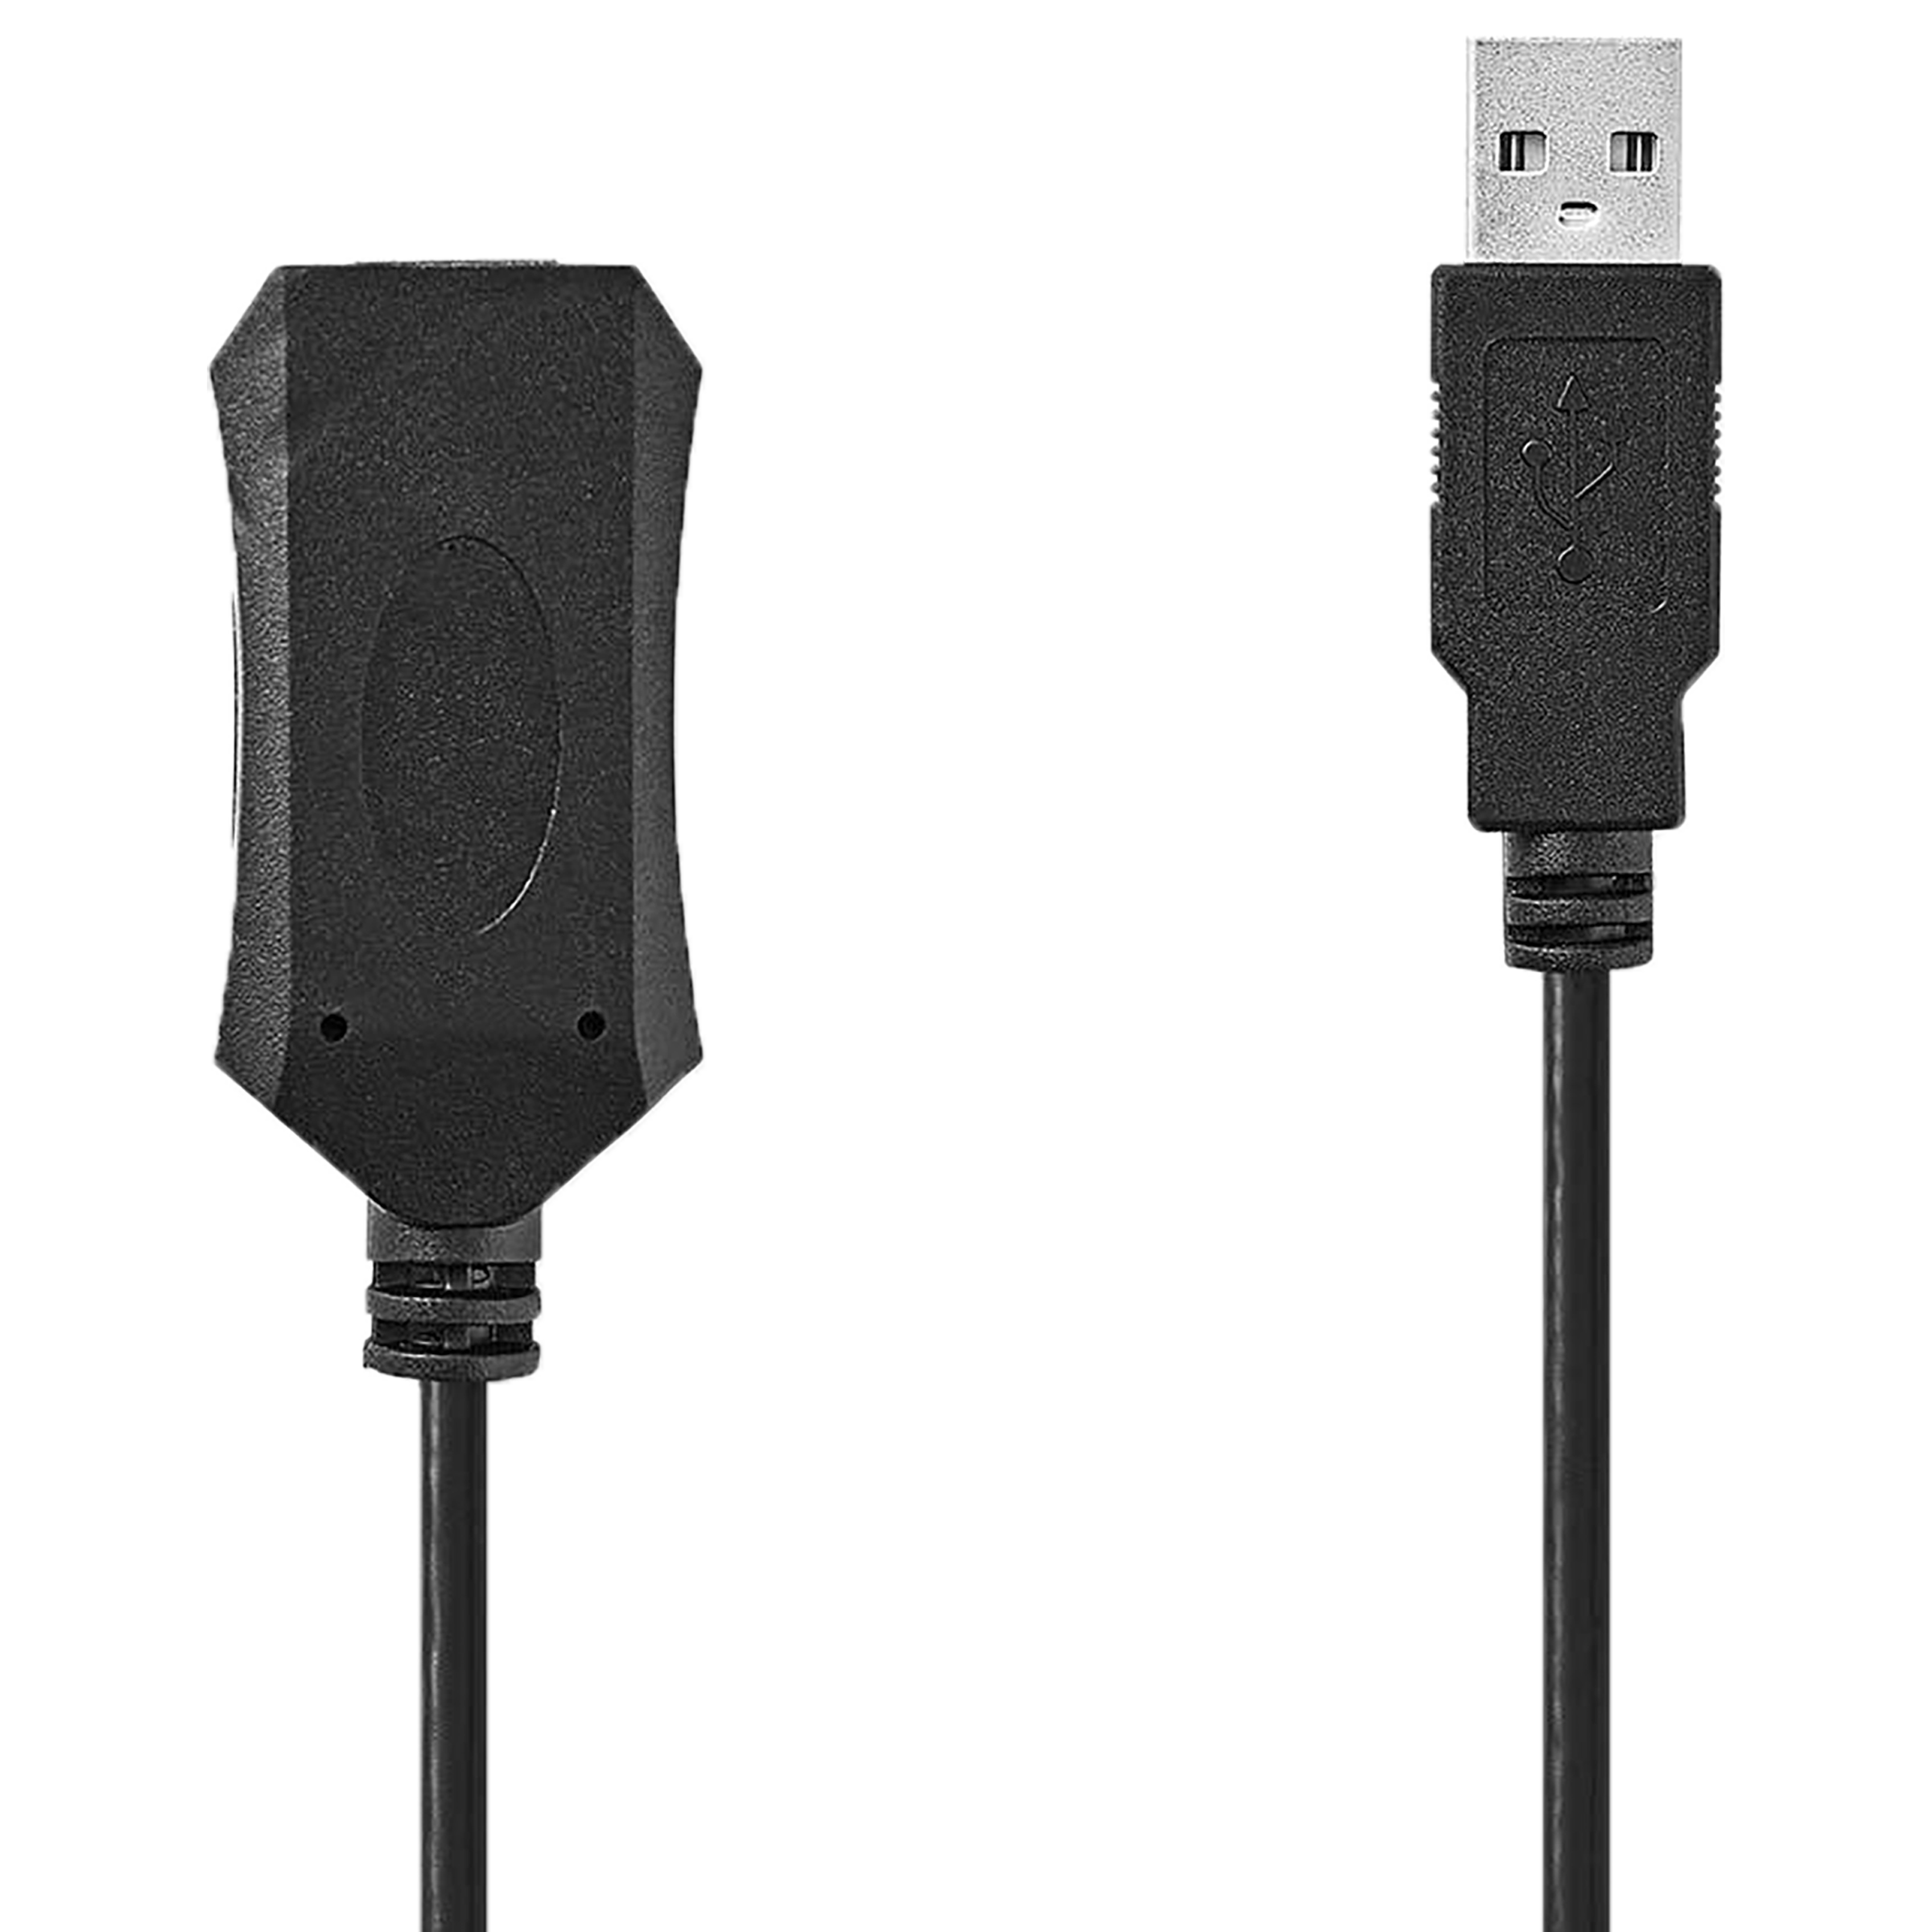 Nedis CCGP60EXTBK200 PVC 20 Meter USB 1.1 (Type-A) to USB 2.0 (Type-A) Data Transfer USB Cable (Transmits Data Over Long Distance, Black)_1